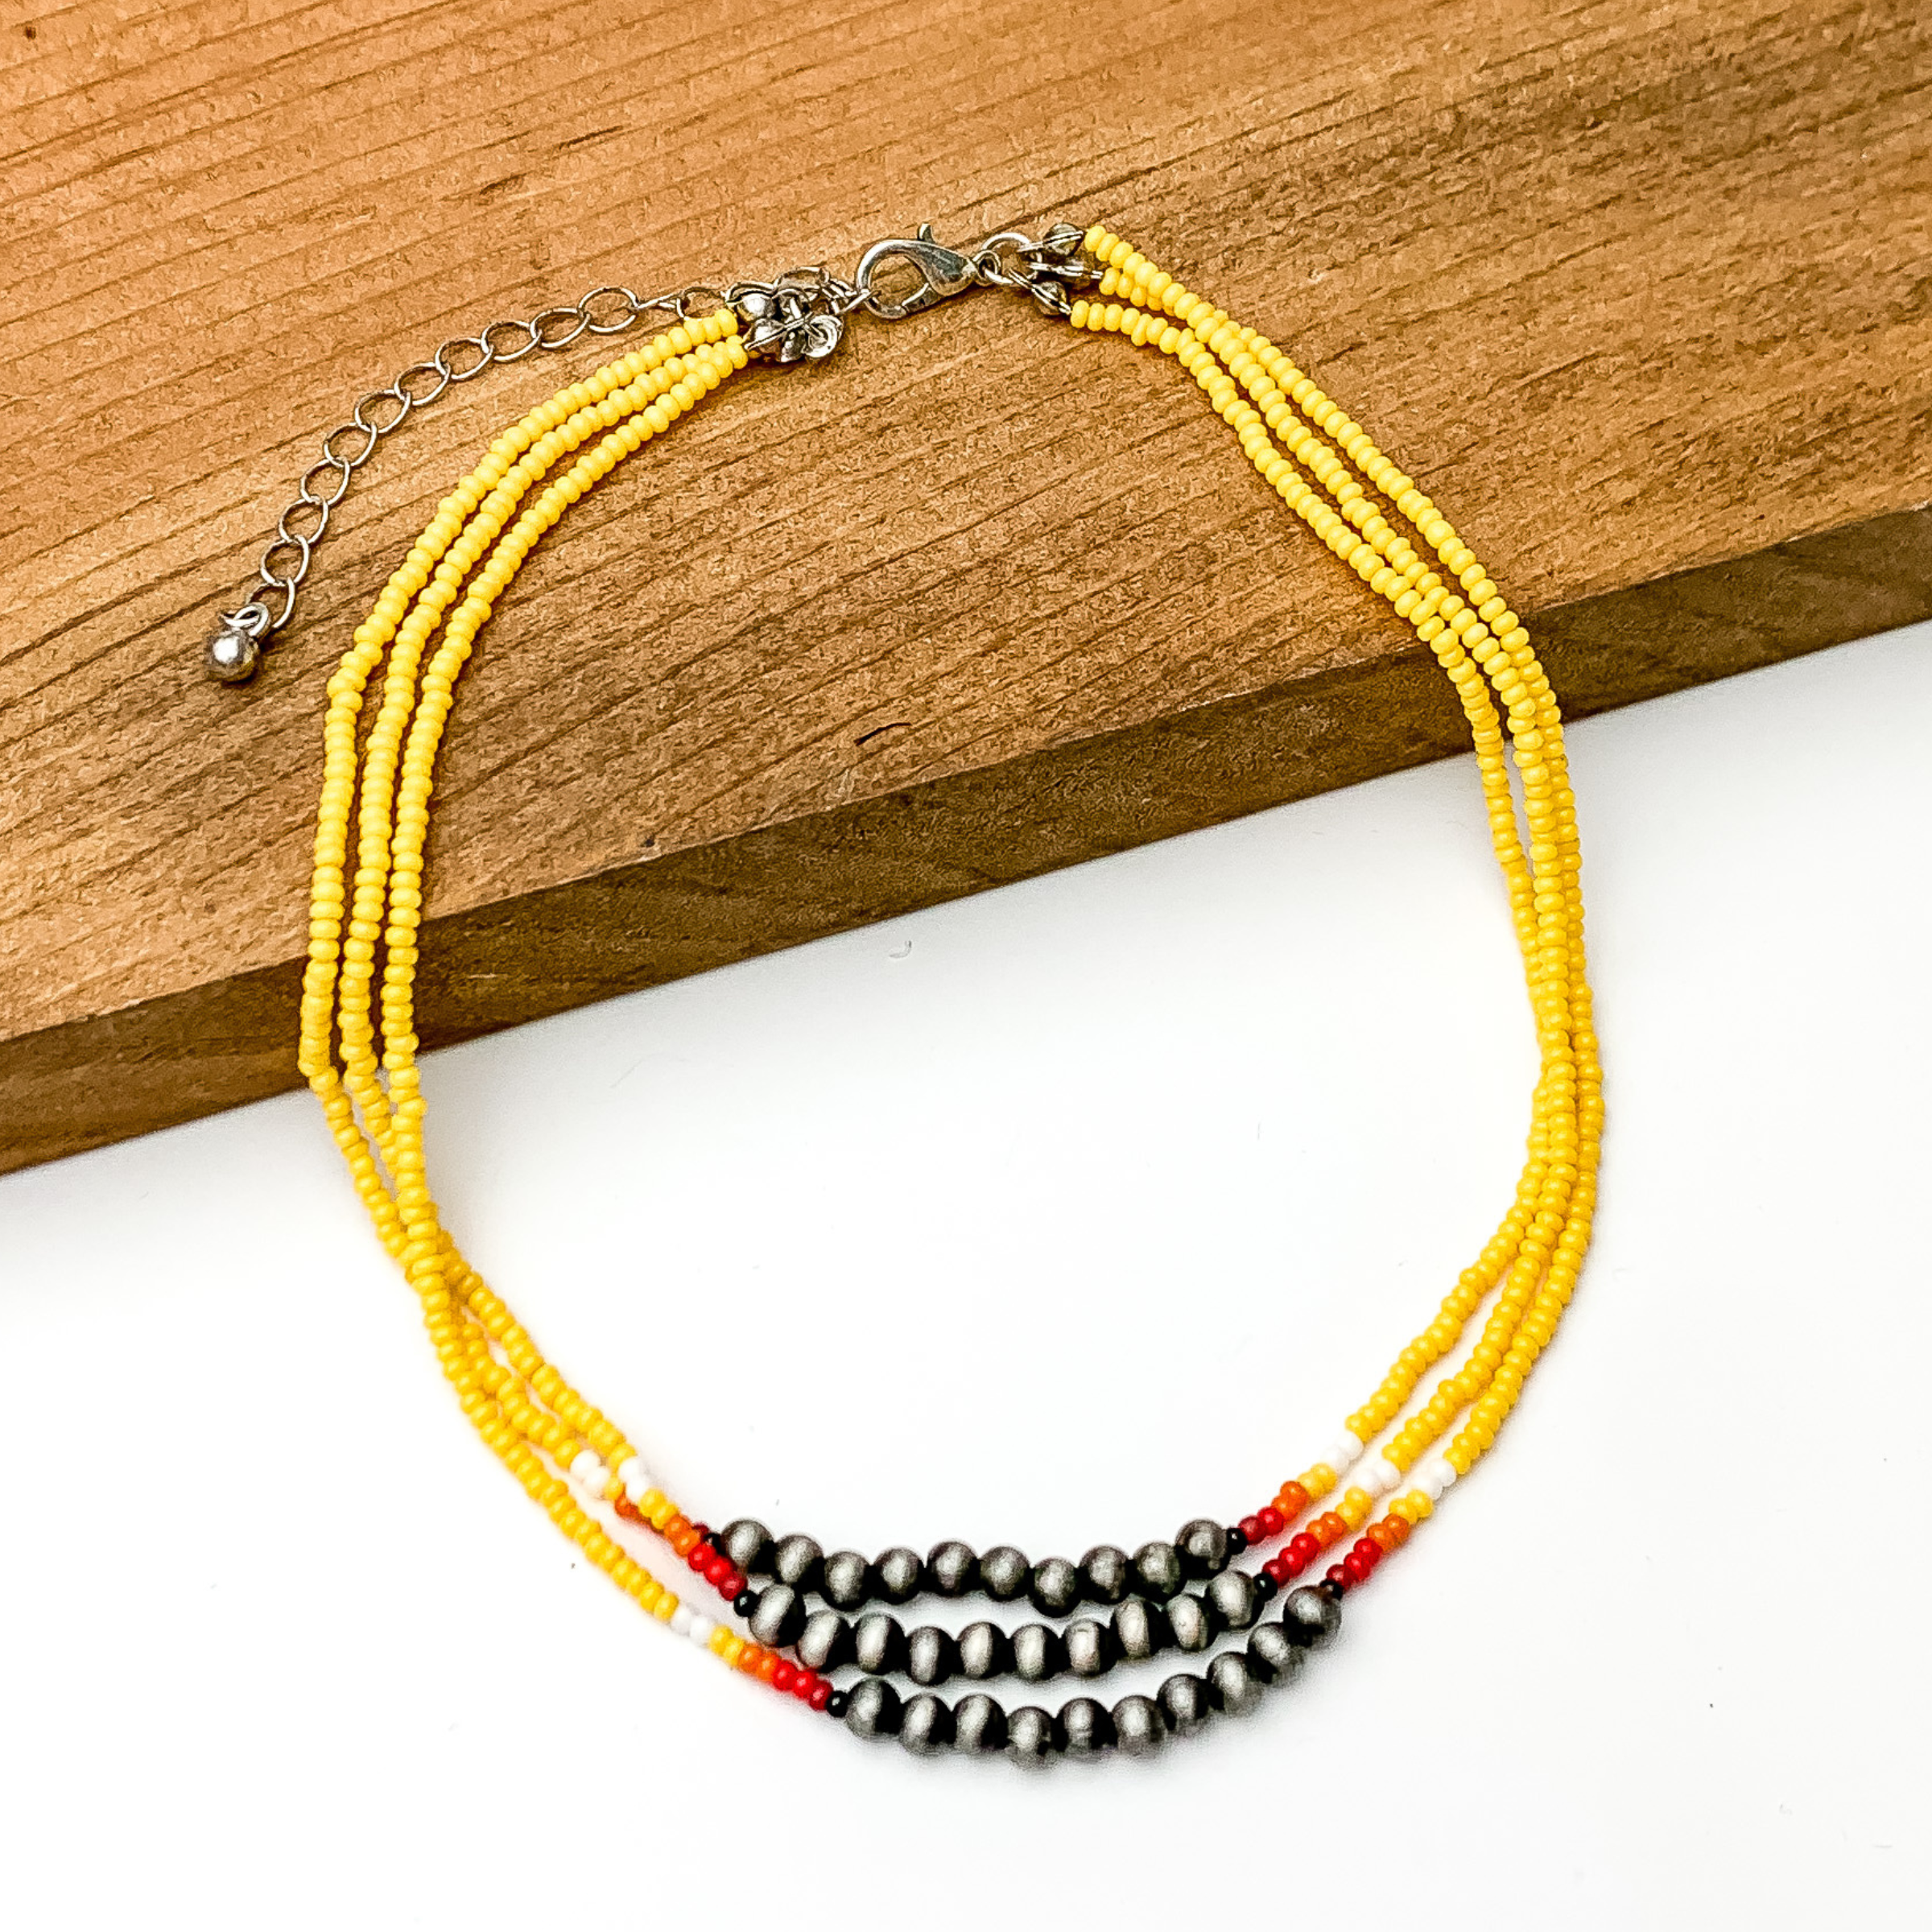 Three stranded necklace with mostly yellow beads. This necklace also includes a segment of silver beads on each strand with a couple white, red, and orange beads on each side of the segment. This necklace is pictured partially on a block of wood on a white background.  